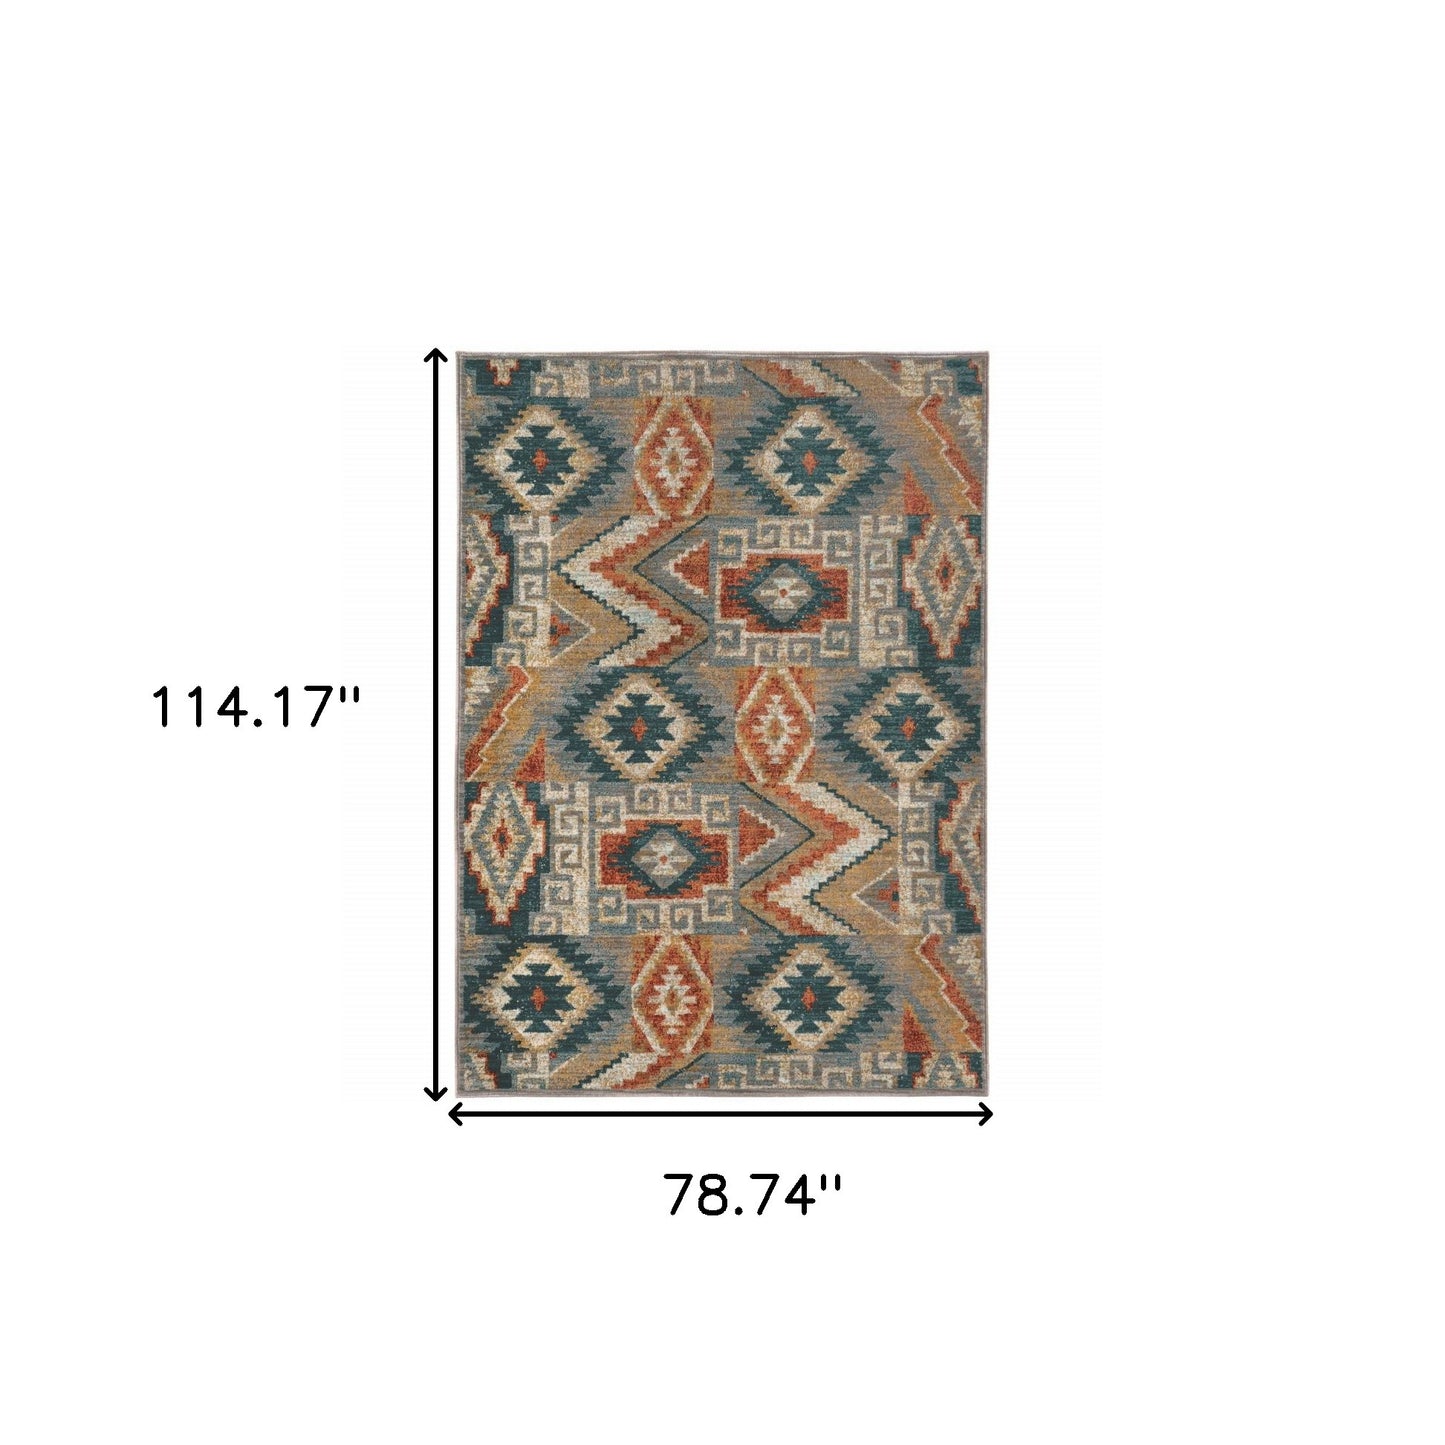 6' X 9' Blue Teal Grey Orange Gold Ivory And Rust Geometric Power Loom Stain Resistant Area Rug